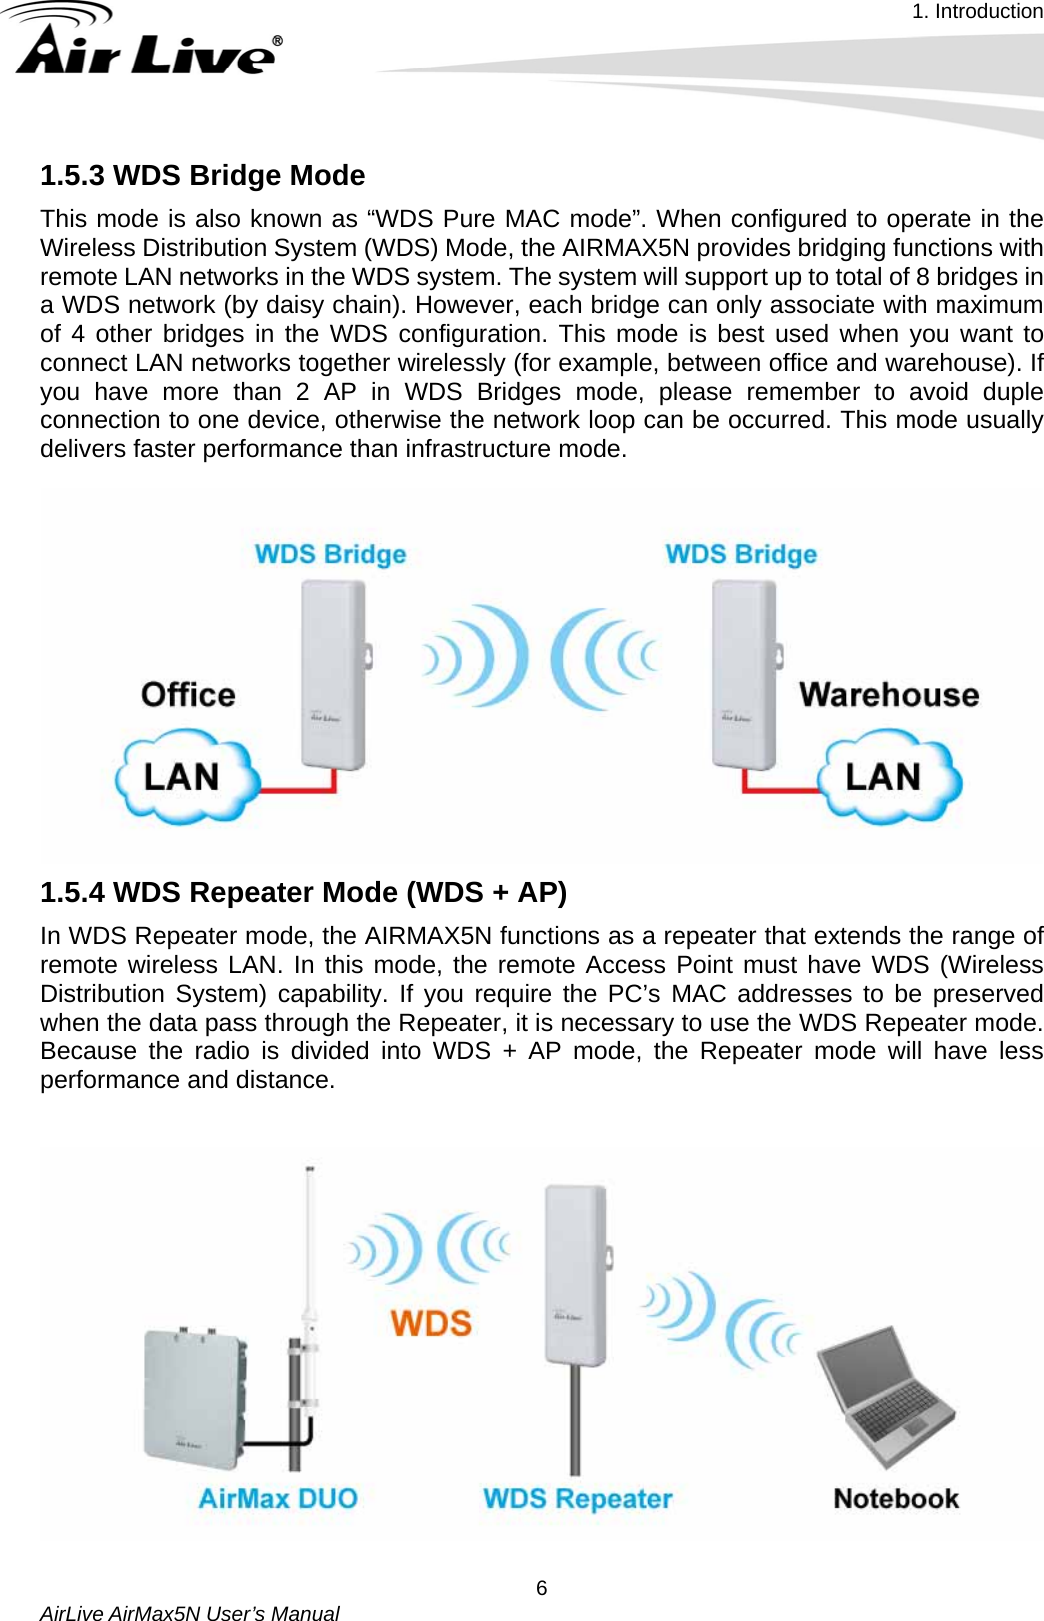 1. Introduction   AirLive AirMax5N User’s Manual  61.5.3 WDS Bridge Mode   This mode is also known as “WDS Pure MAC mode”. When configured to operate in the Wireless Distribution System (WDS) Mode, the AIRMAX5N provides bridging functions with remote LAN networks in the WDS system. The system will support up to total of 8 bridges in a WDS network (by daisy chain). However, each bridge can only associate with maximum of 4 other bridges in the WDS configuration. This mode is best used when you want to connect LAN networks together wirelessly (for example, between office and warehouse). If you have more than 2 AP in WDS Bridges mode, please remember to avoid duple connection to one device, otherwise the network loop can be occurred. This mode usually delivers faster performance than infrastructure mode.    1.5.4 WDS Repeater Mode (WDS + AP) In WDS Repeater mode, the AIRMAX5N functions as a repeater that extends the range of remote wireless LAN. In this mode, the remote Access Point must have WDS (Wireless Distribution System) capability. If you require the PC’s MAC addresses to be preserved when the data pass through the Repeater, it is necessary to use the WDS Repeater mode. Because the radio is divided into WDS + AP mode, the Repeater mode will have less performance and distance.    